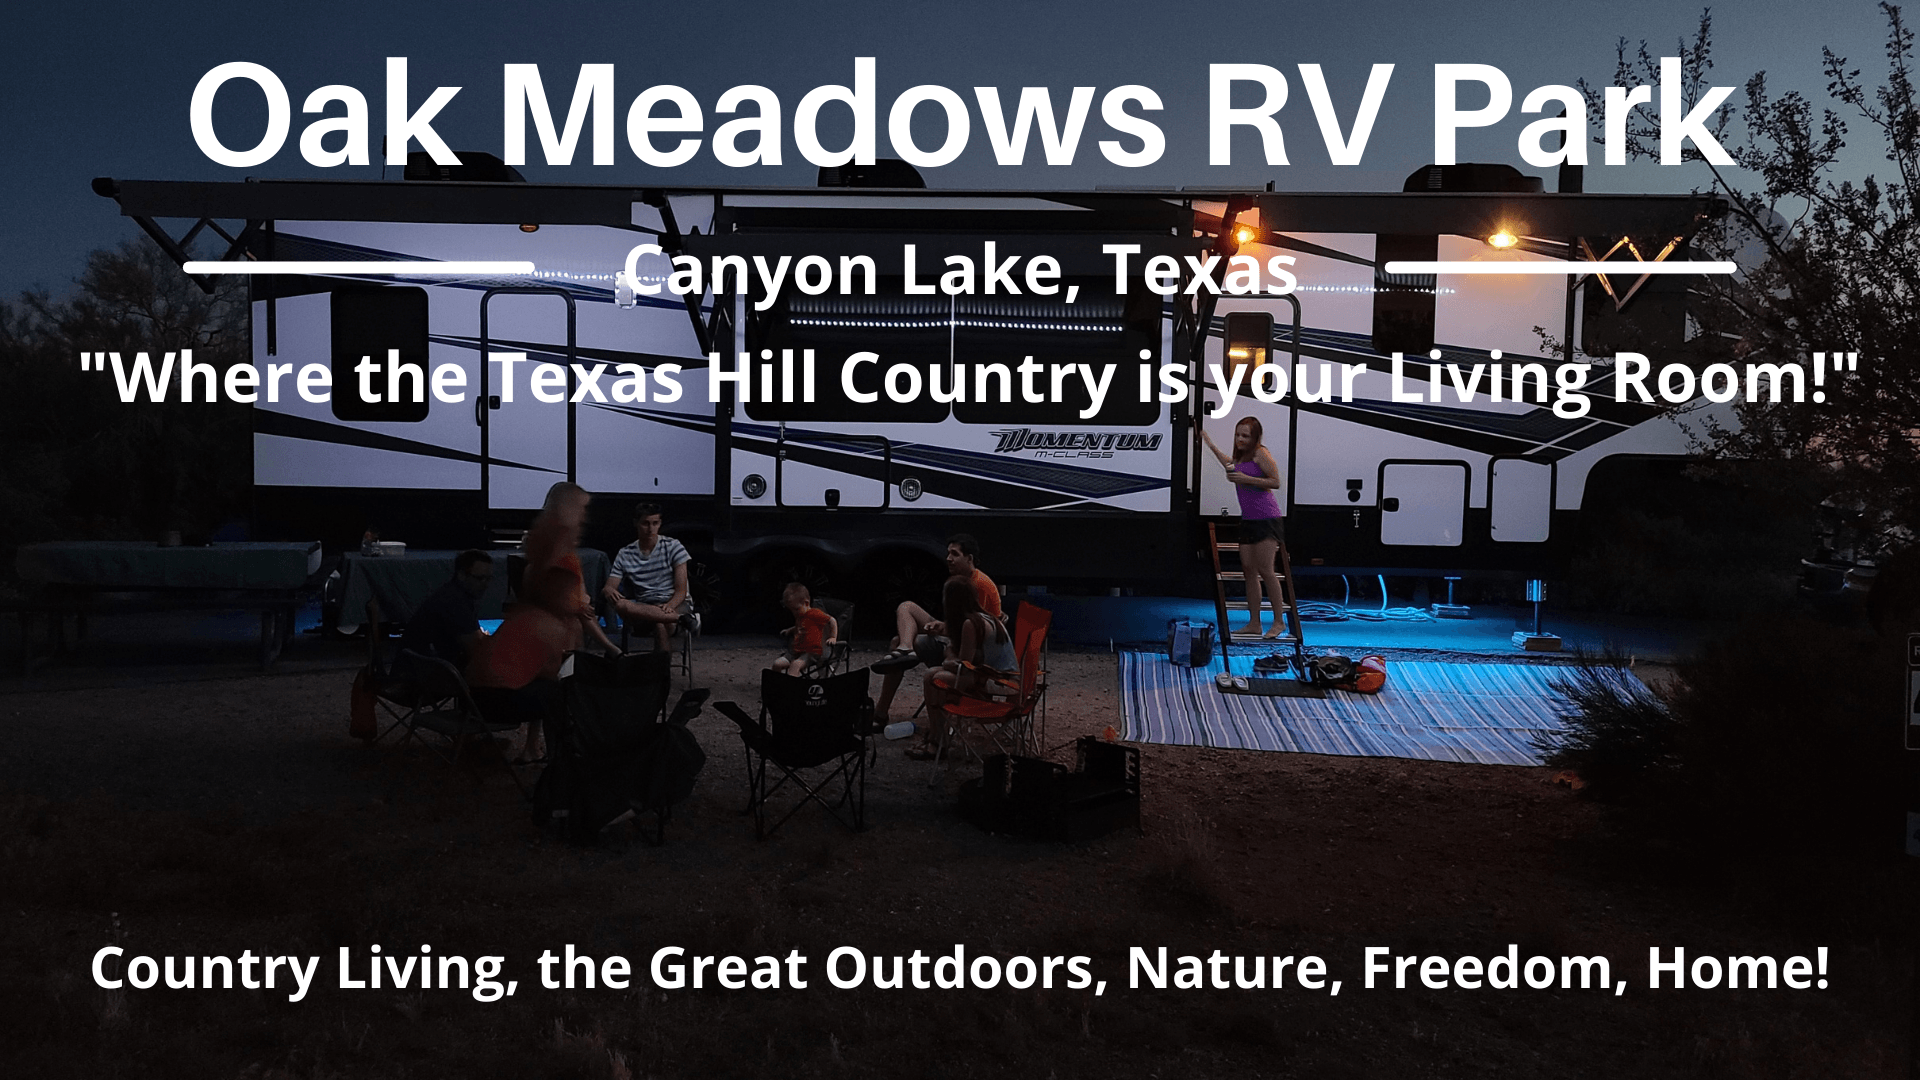 RV life-country living-the great outdoors-nature-freedom-campfires-stars in the night sky-Oak Meadows RV Park